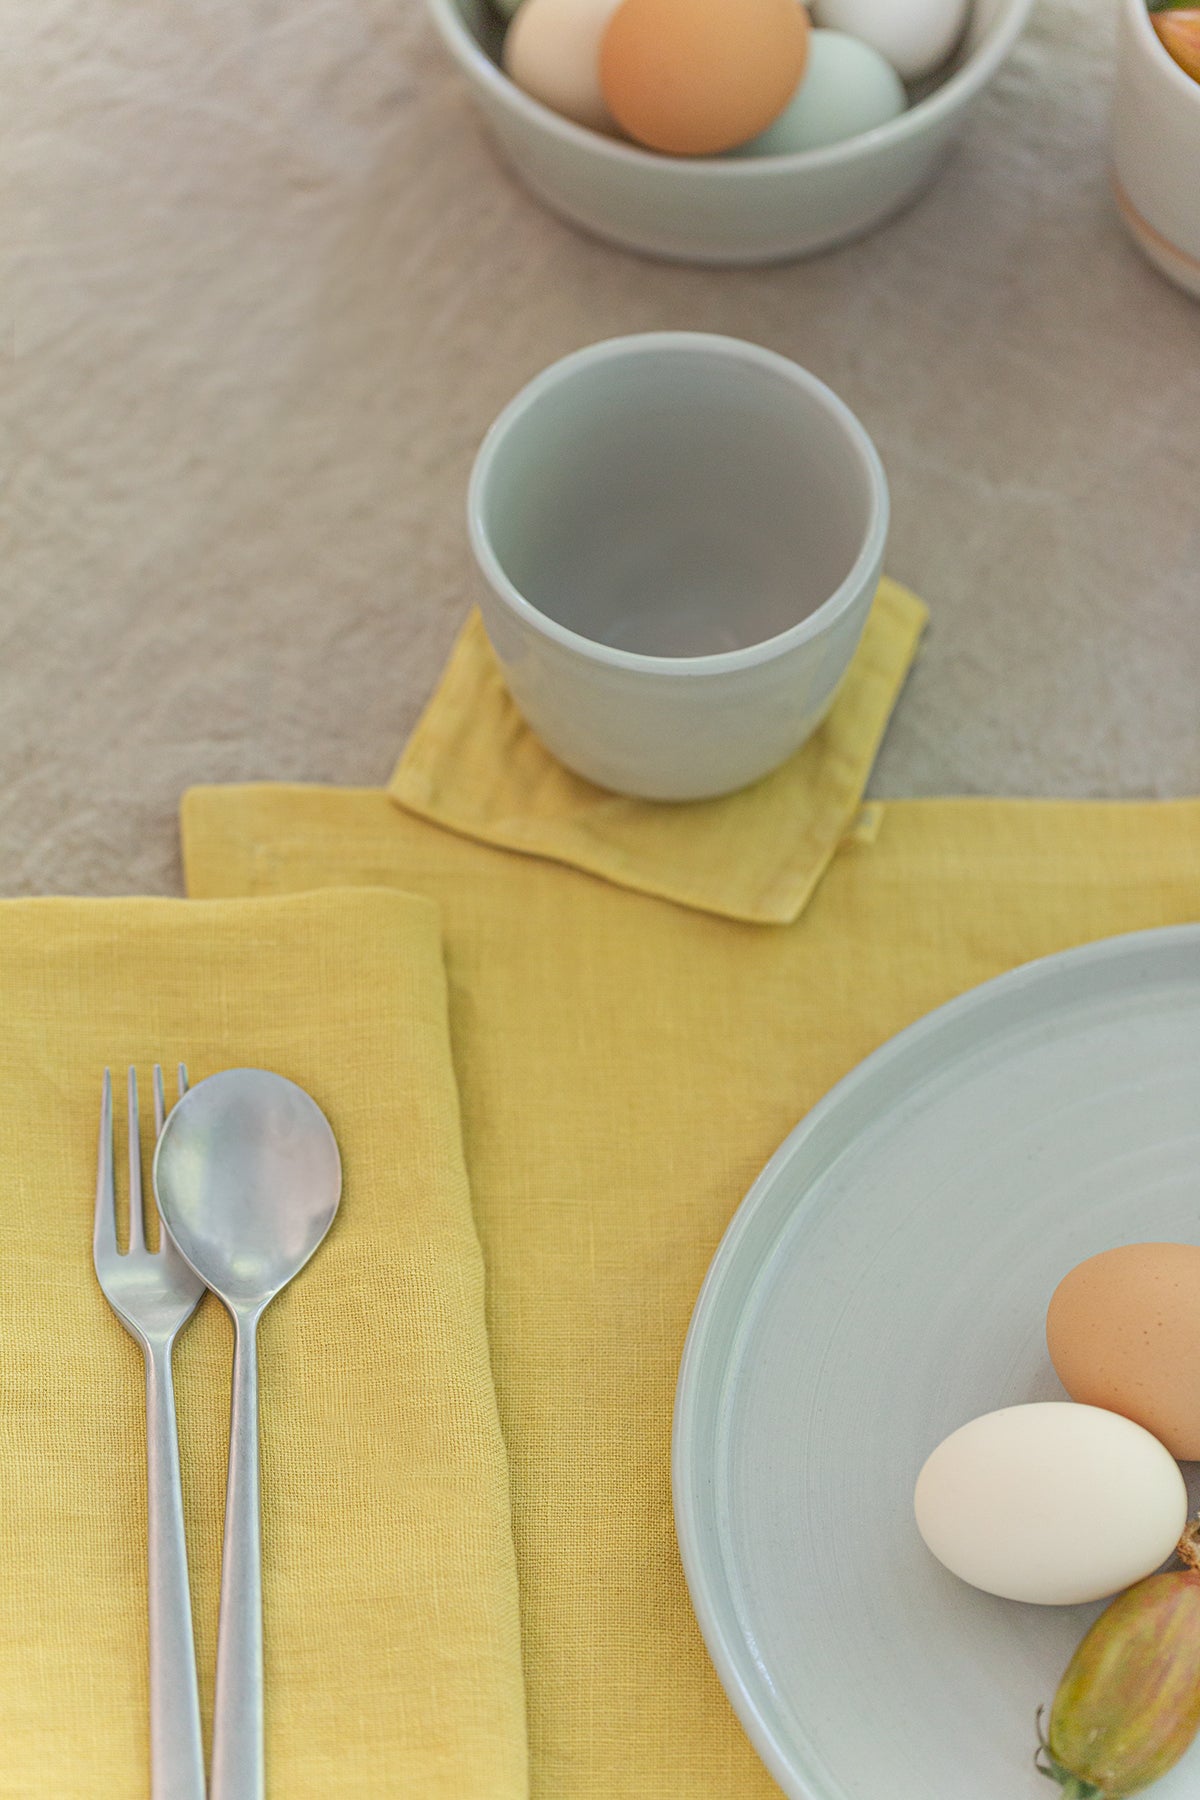 A breakfast table setting with a pale blue plate, silver fork and spoon on an elegant yellow Jenny Graham Home linen napkin, and a cup surrounded by eggs in bowls.-14899237224641